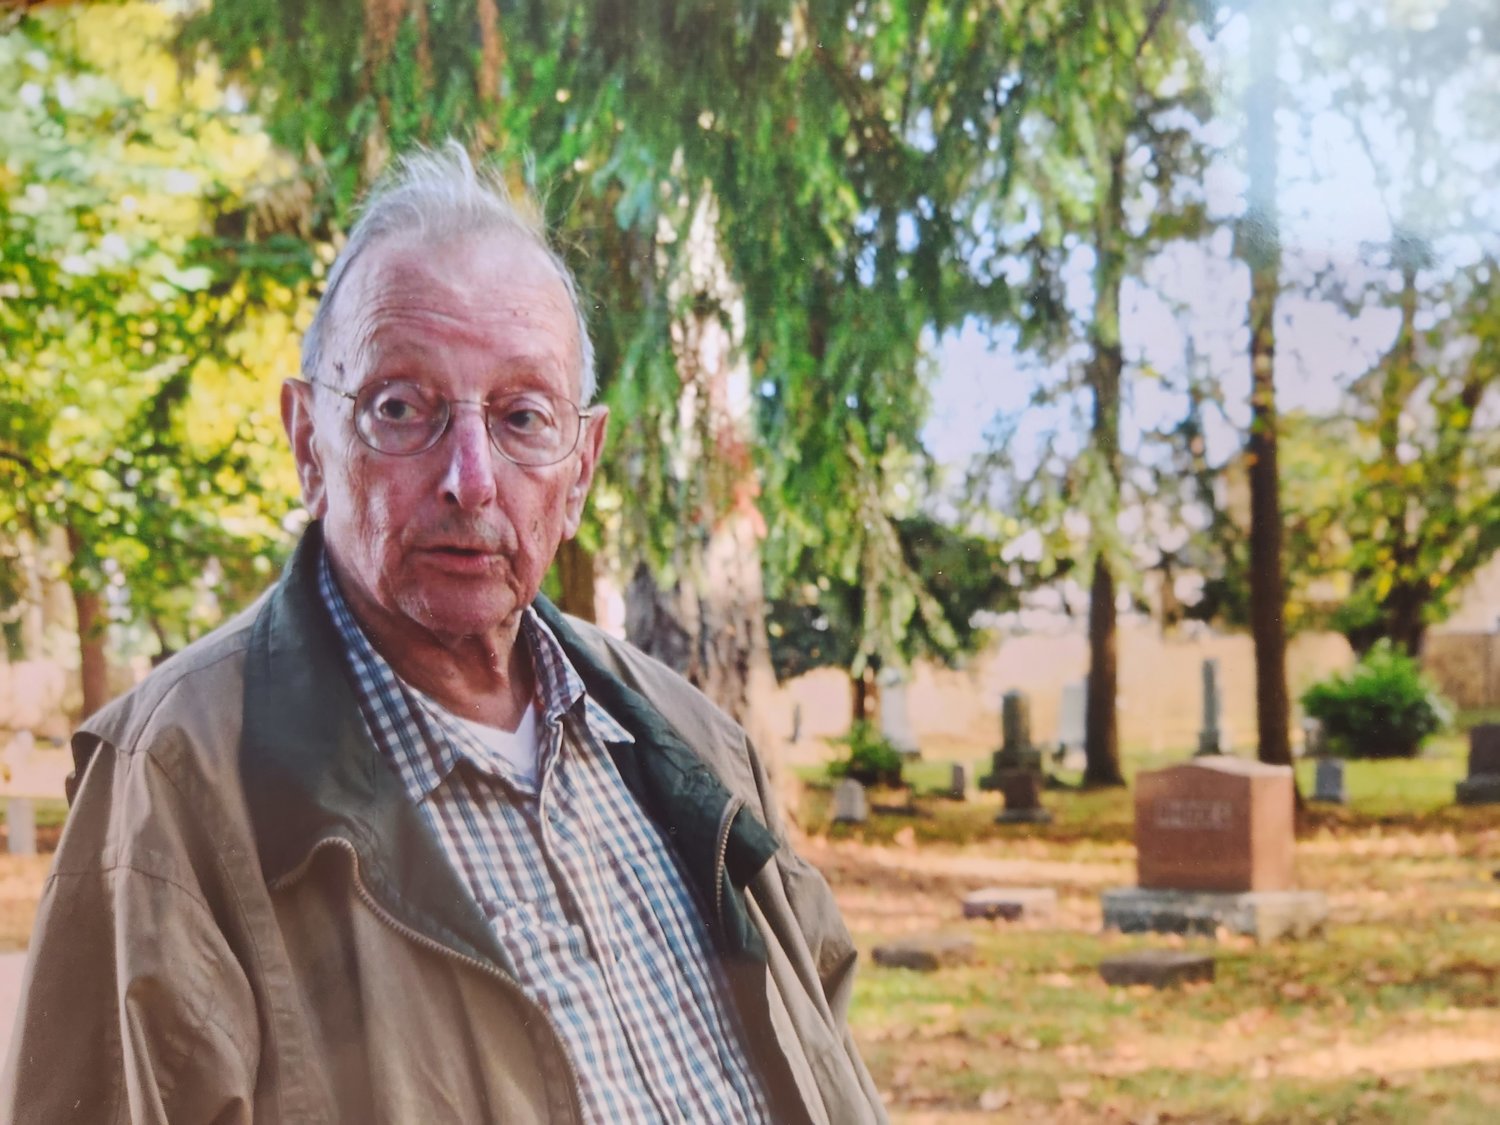 Larry Mills is pictured at the Grand Mound Cemetery in this photograph from Greg Isaacson.